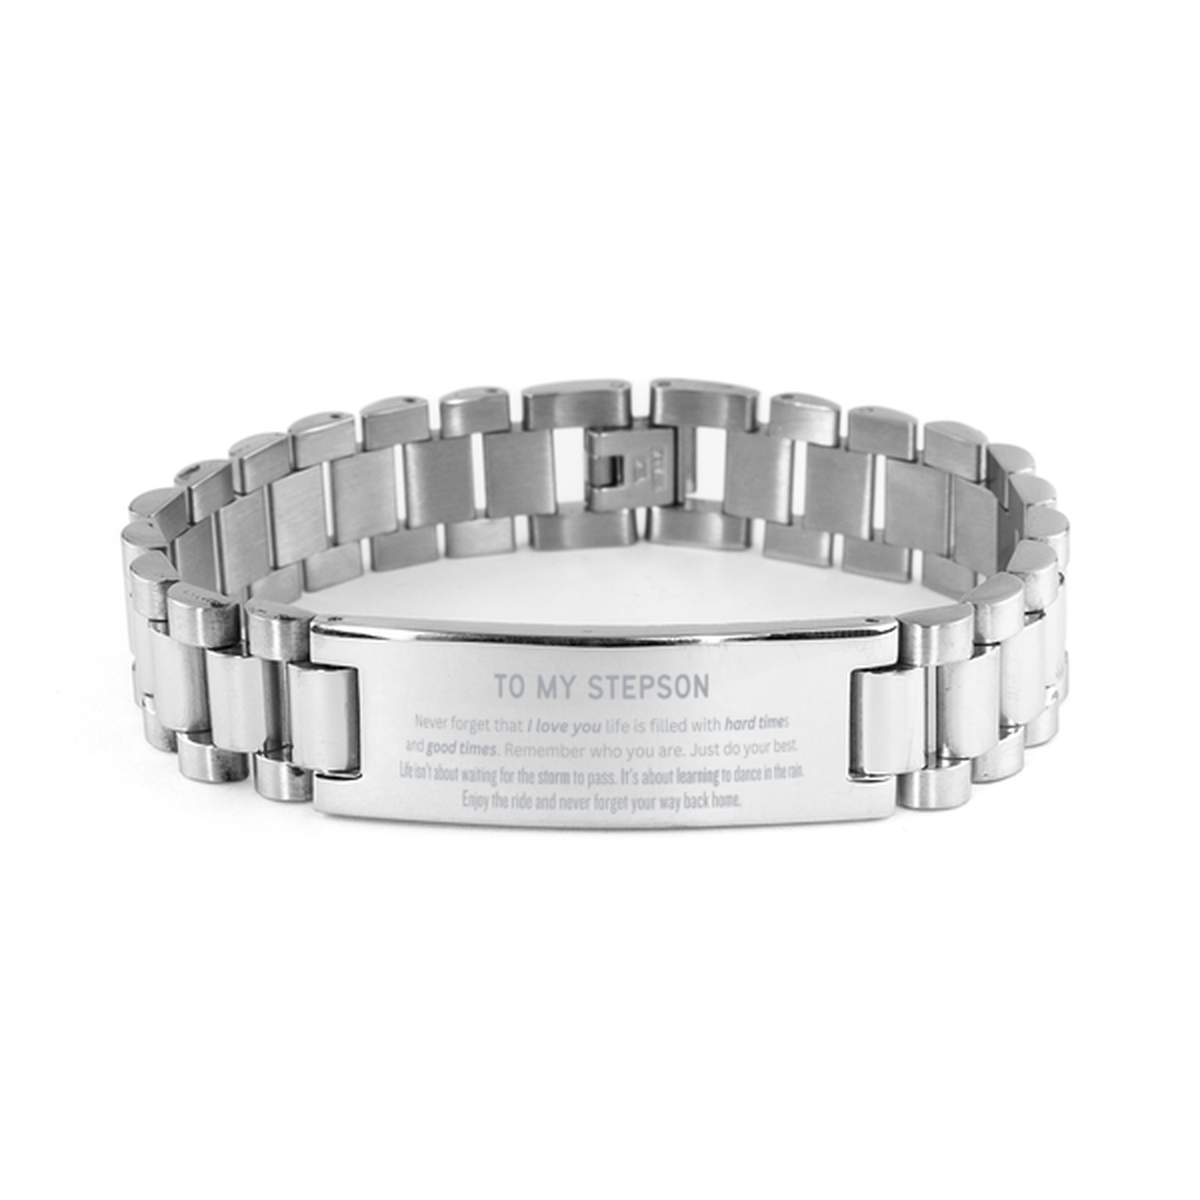 Christmas Stepson Ladder Stainless Steel Bracelet Gifts, To My Stepson Birthday Thank You Gifts For Stepson, Graduation Unique Gifts For Stepson To My Stepson Never forget that I love you life is filled with hard times and good times. Remember who you are